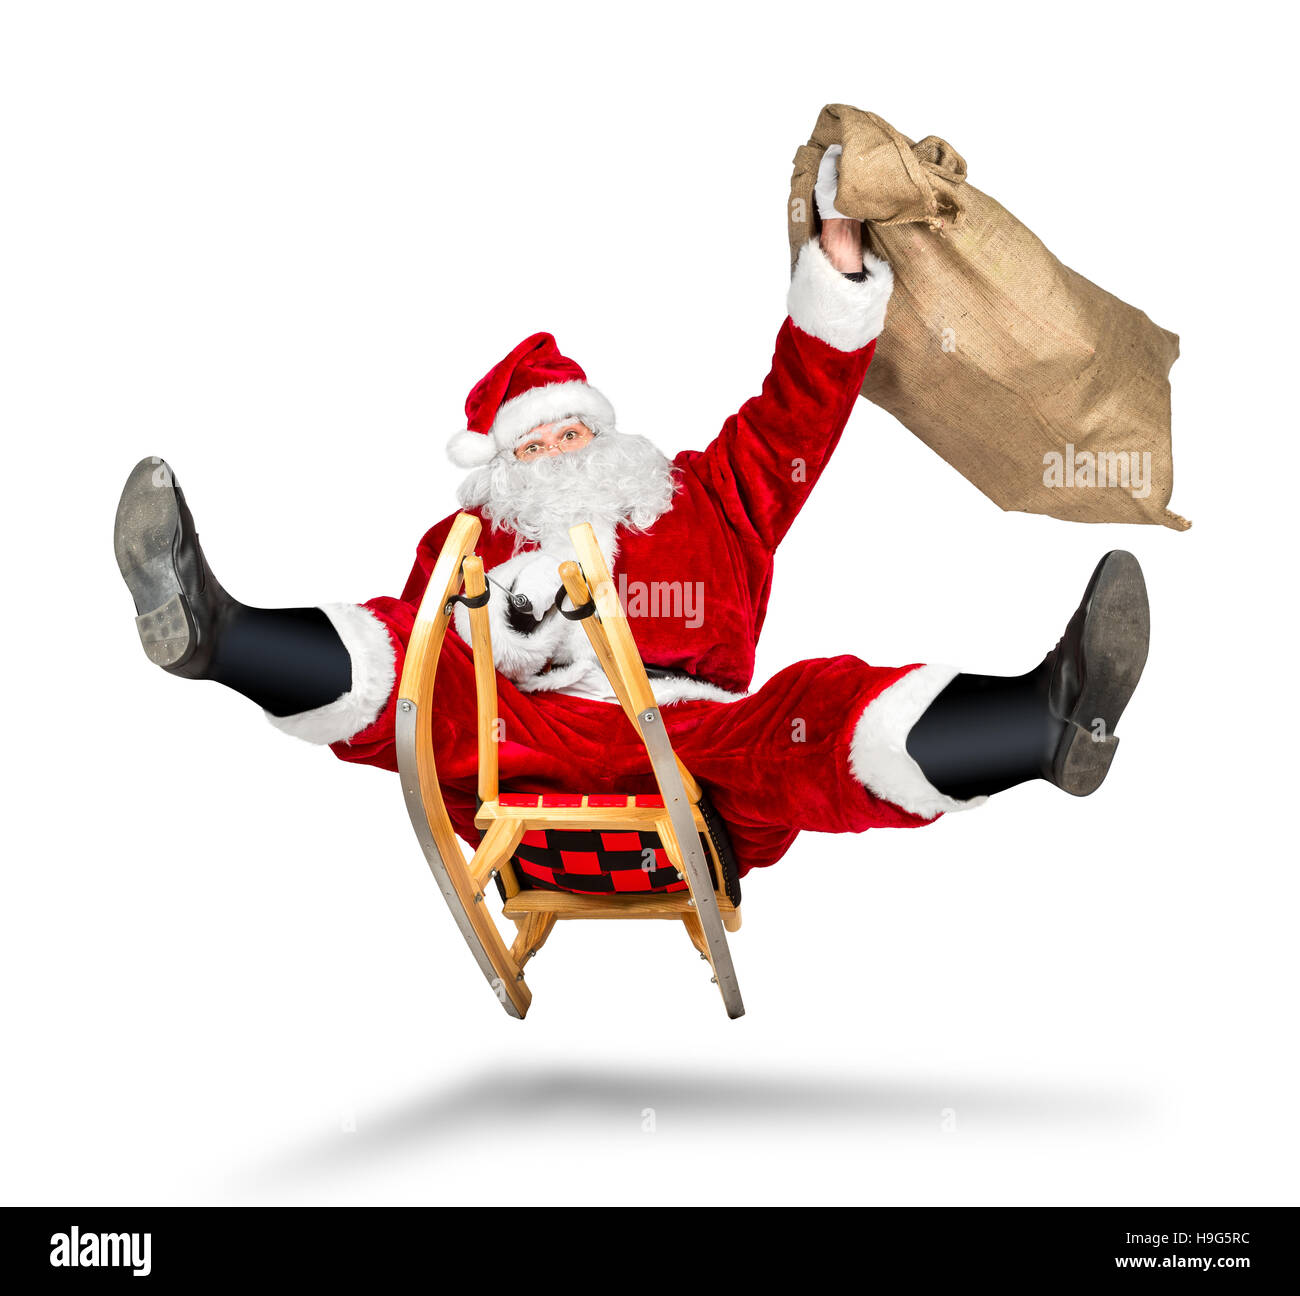 crazy santa claus on his sleigh hilarious fast funny crazy xmas christmas gift present delivery isolated white background Stock Photo